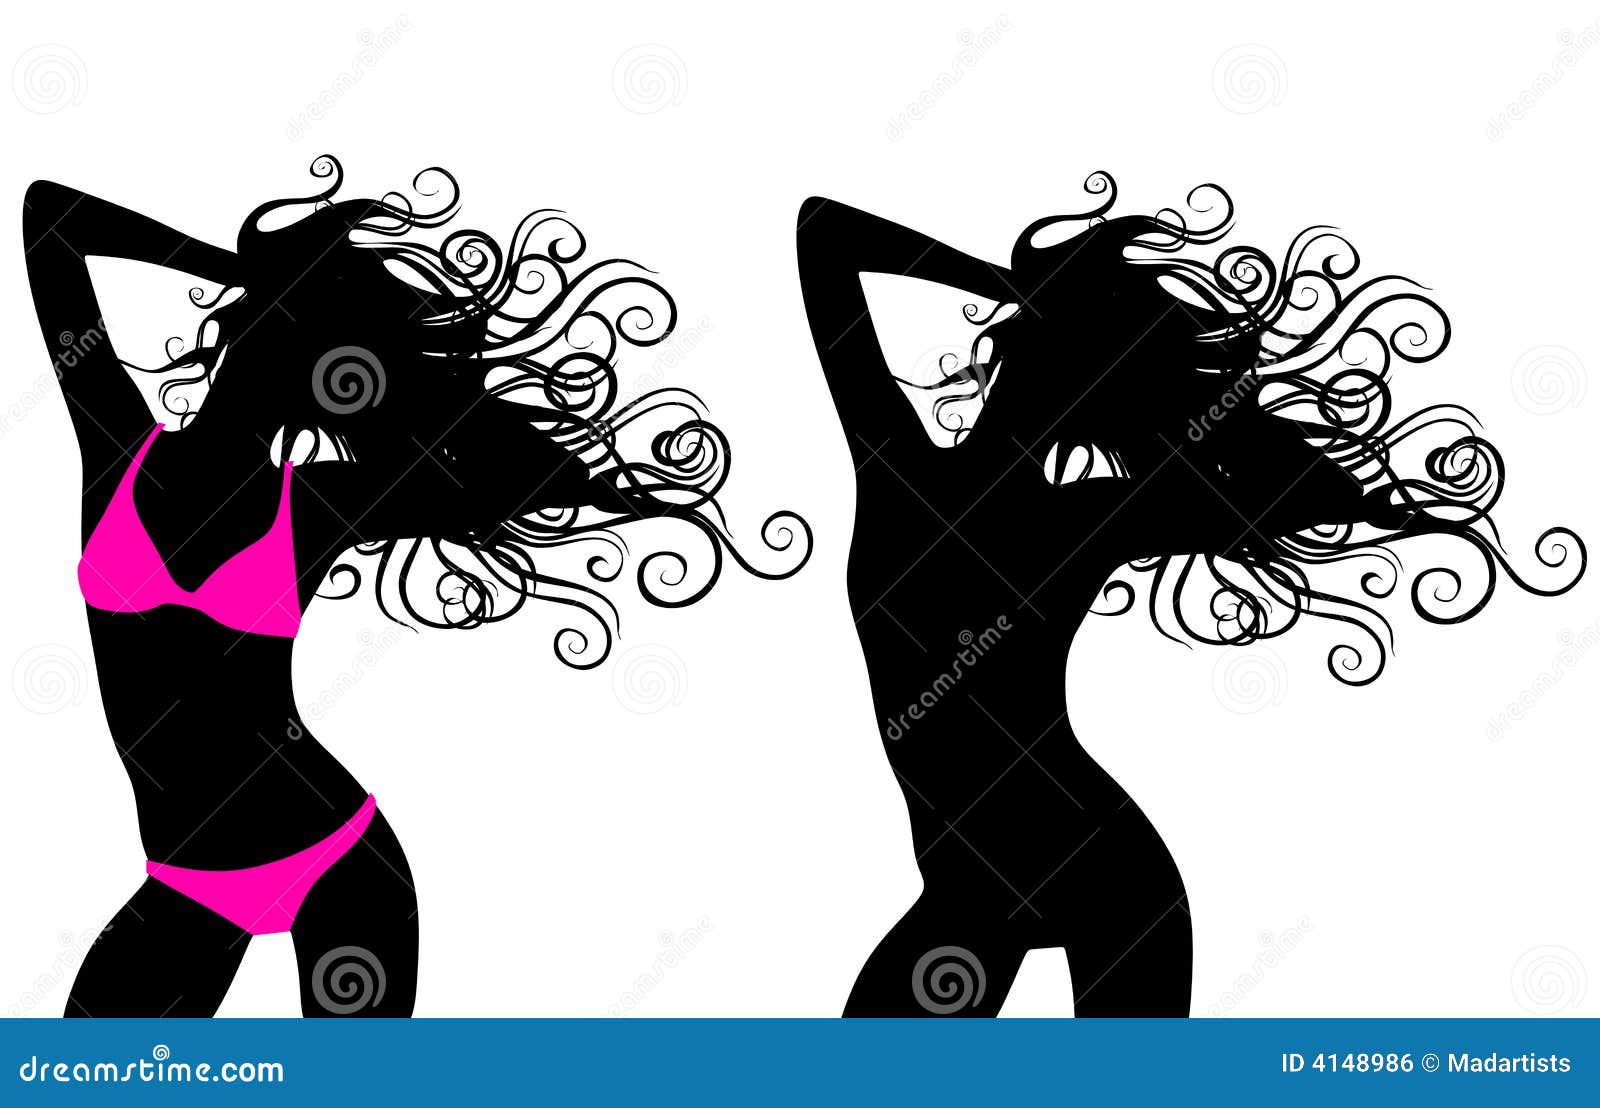 Monochrome Silhouette Of Woman With Swimsuit Bra And Top Knot In Chest  Vector Illustration. Royalty Free SVG, Cliparts, Vectors, and Stock  Illustration. Image 76185030.